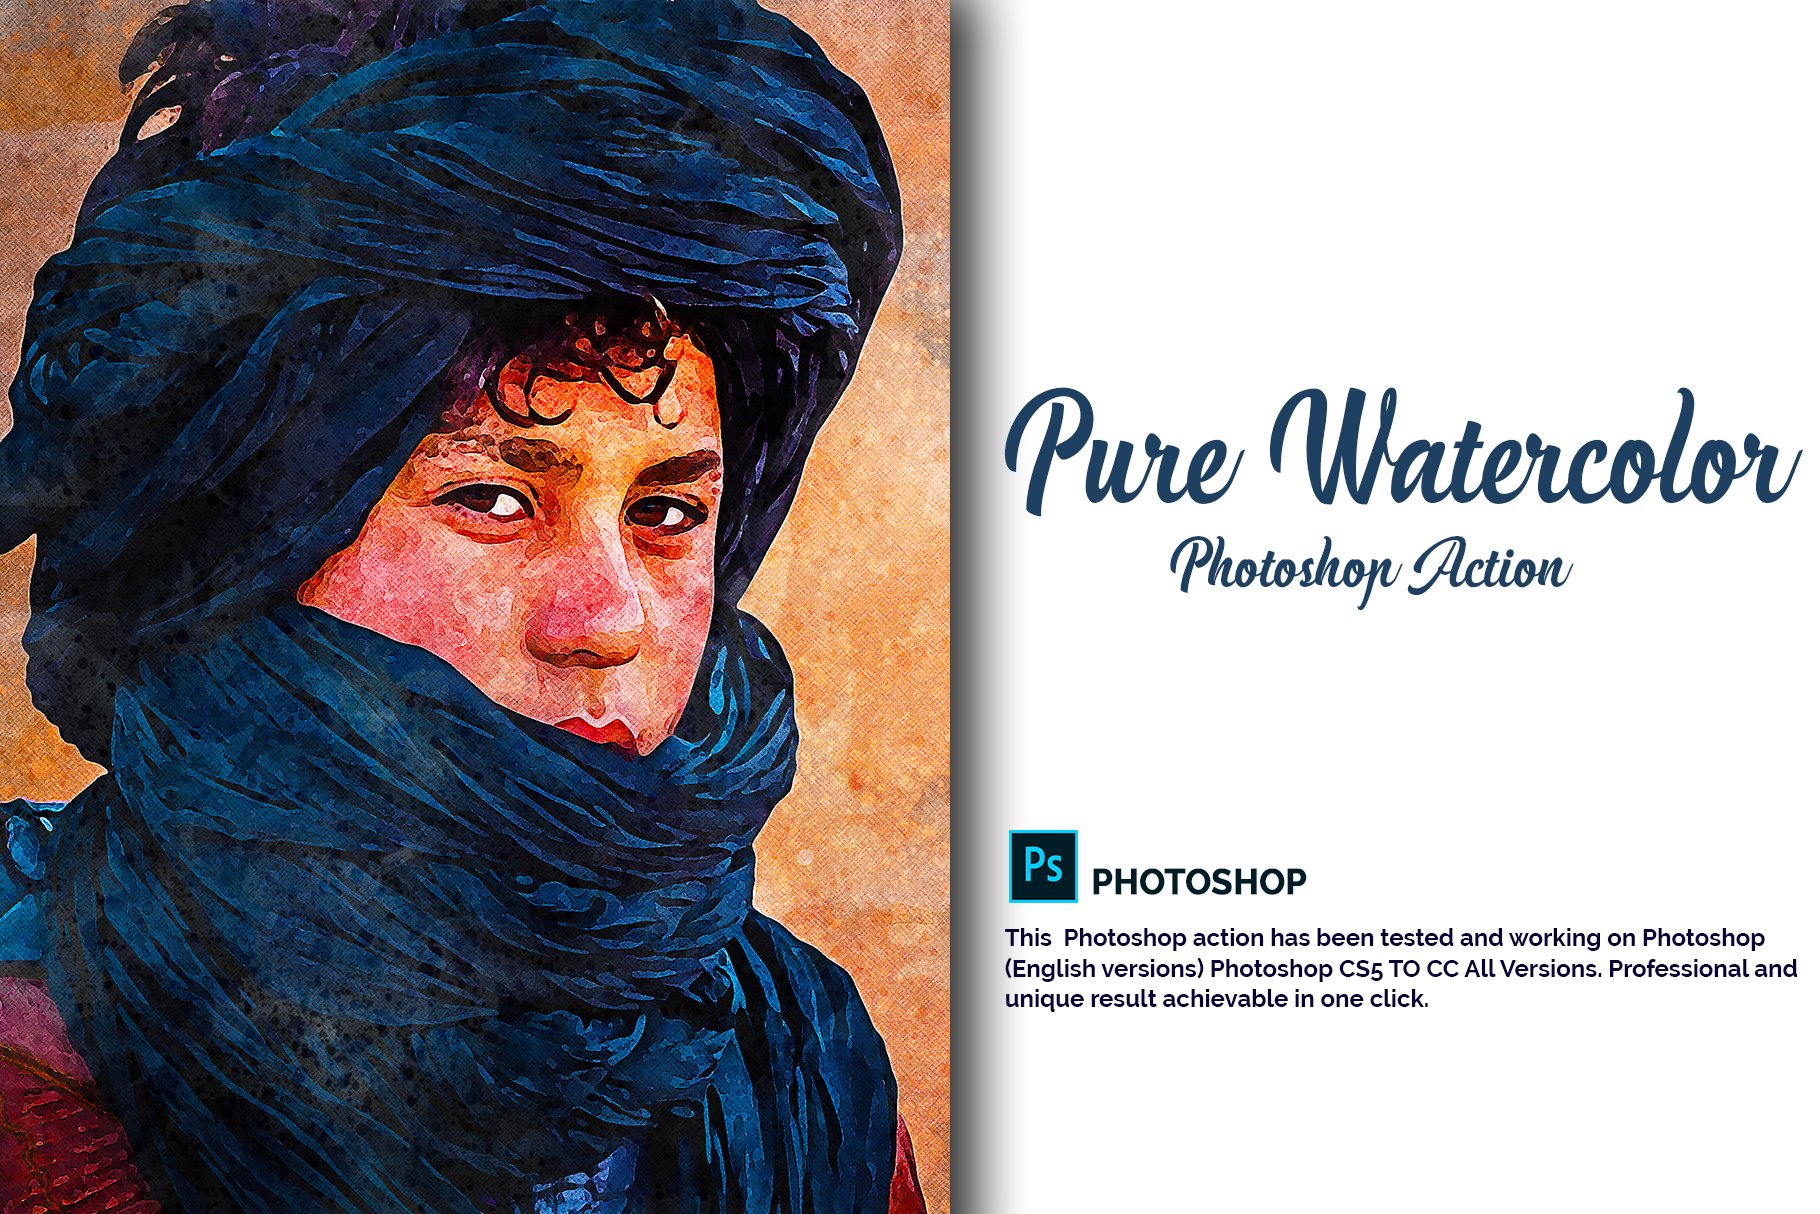 Pure Watercolor Photoshop Actioncover image.